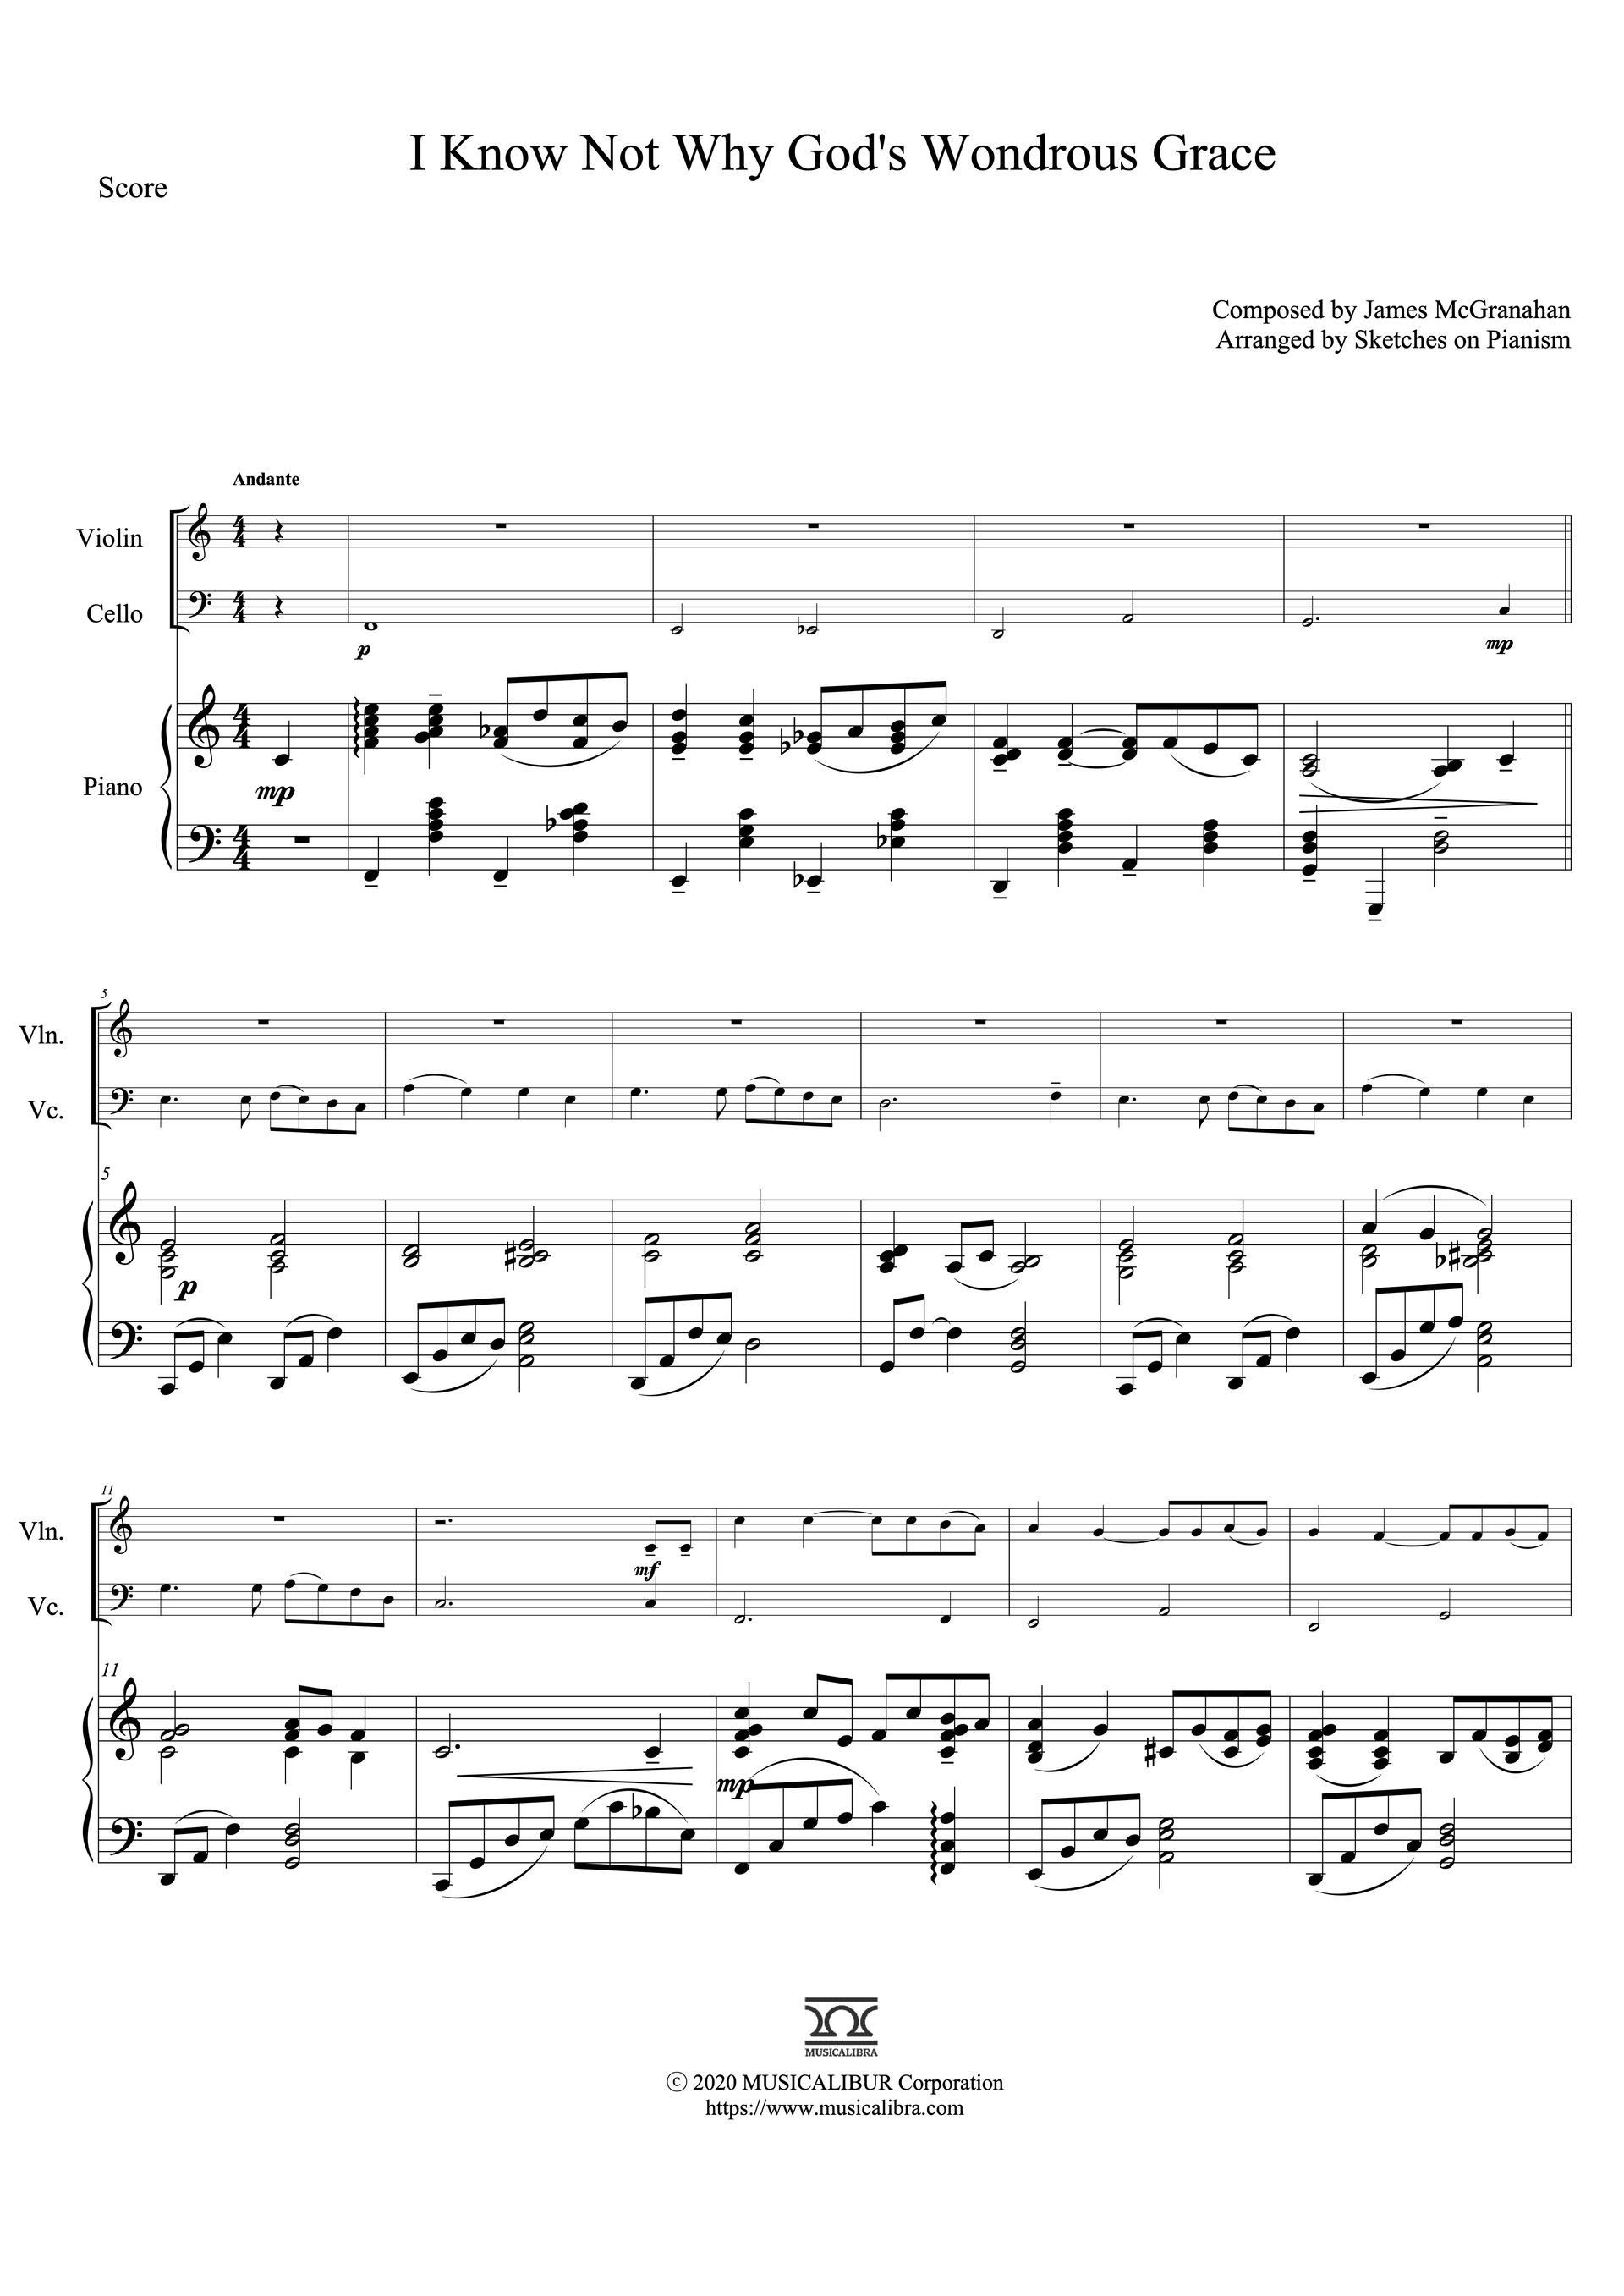 Sheet music of I Know Not Why God's Wondrous Grace arranged for violin, cello and piano trio preview page 1